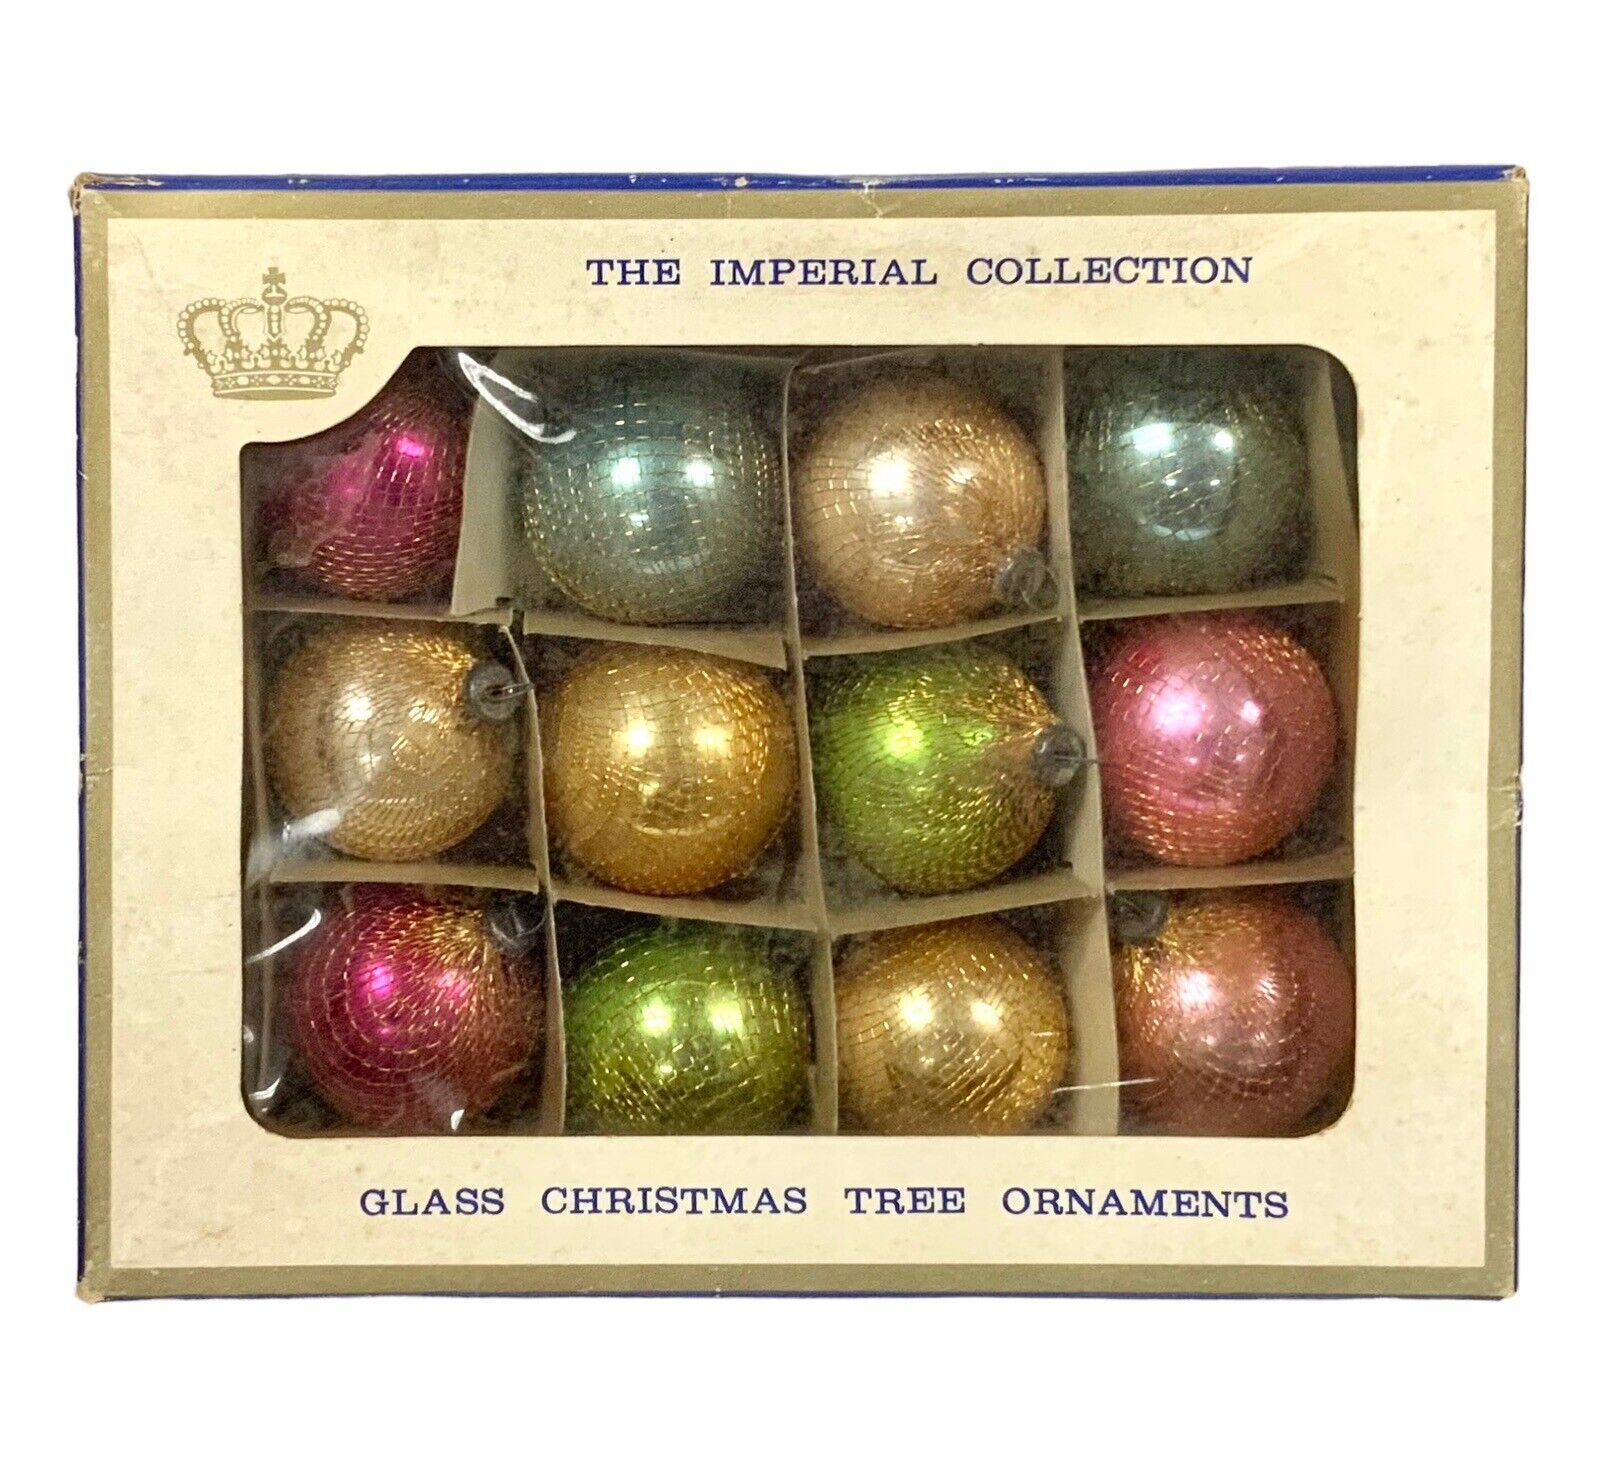 ViTG Sears Glass Christmas Ornaments Gold Netting  Imperial Collection 12 - 1.5”